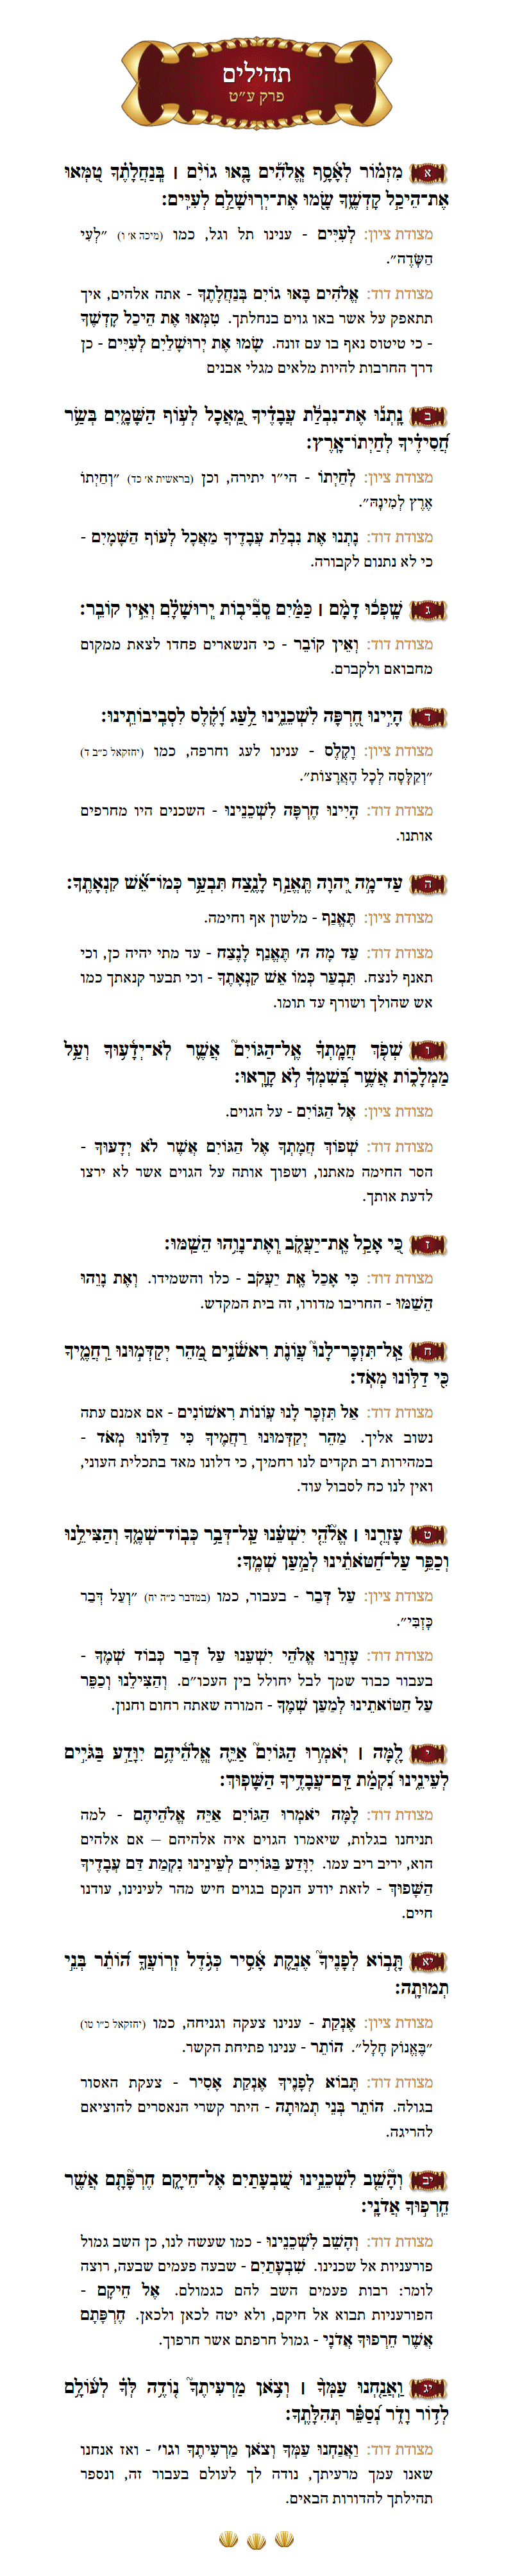 Sefer Tehillim Chapter 79 with commentary